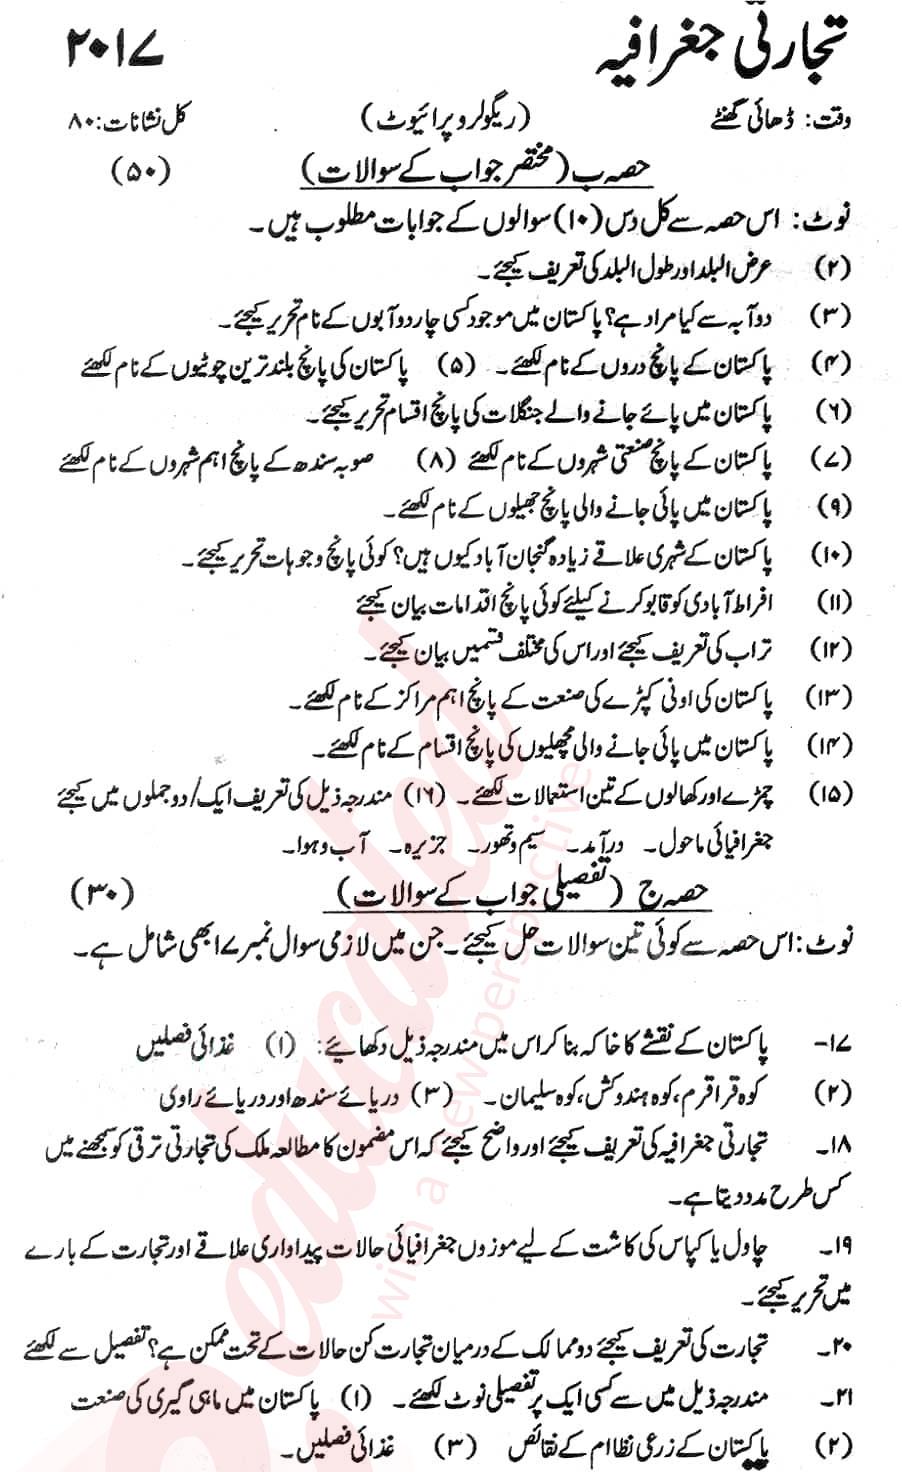 Commercial Geography 10th Urdu Medium Past Paper Group 1 KPBTE 2017